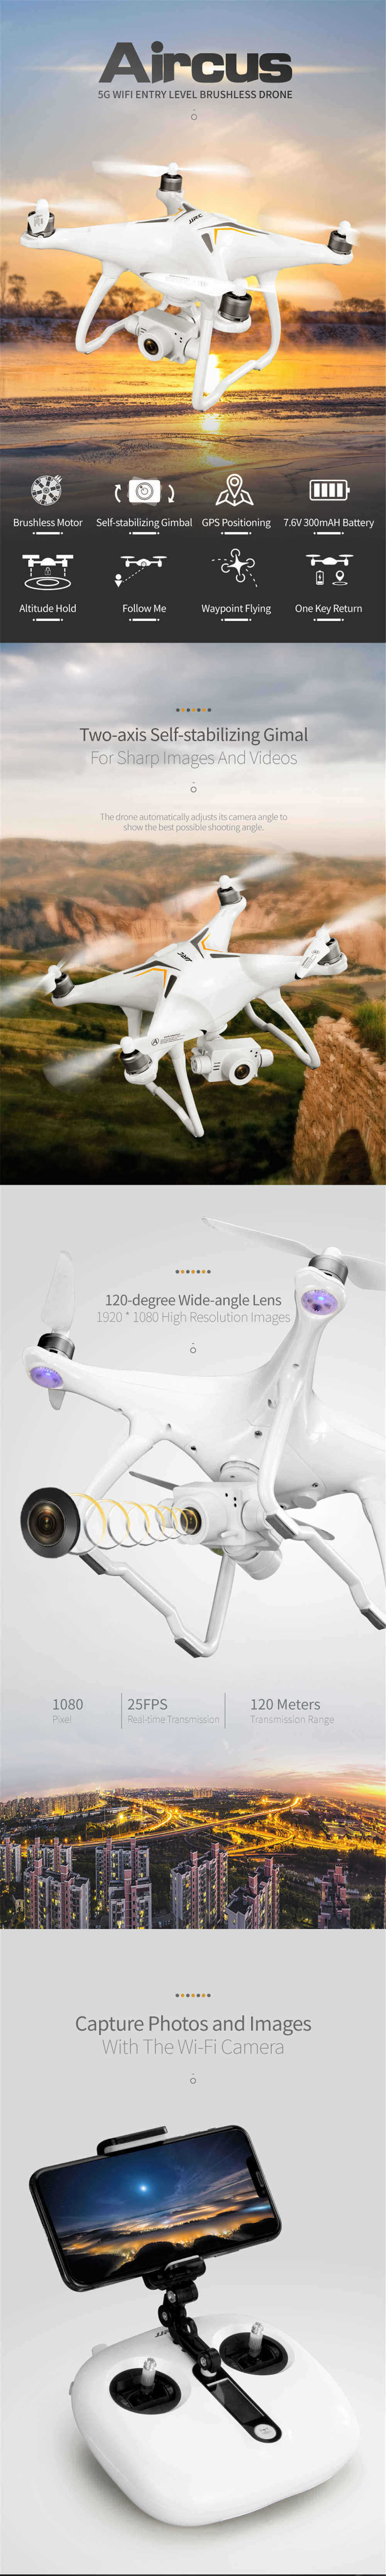 JJRC-X6-Aircus-5G-WIFI-FPV-Double-GPS-With-1080P-Wide-Angle-Camera-Two-Axis-Self-Stabilizing-Gimbal--1472966